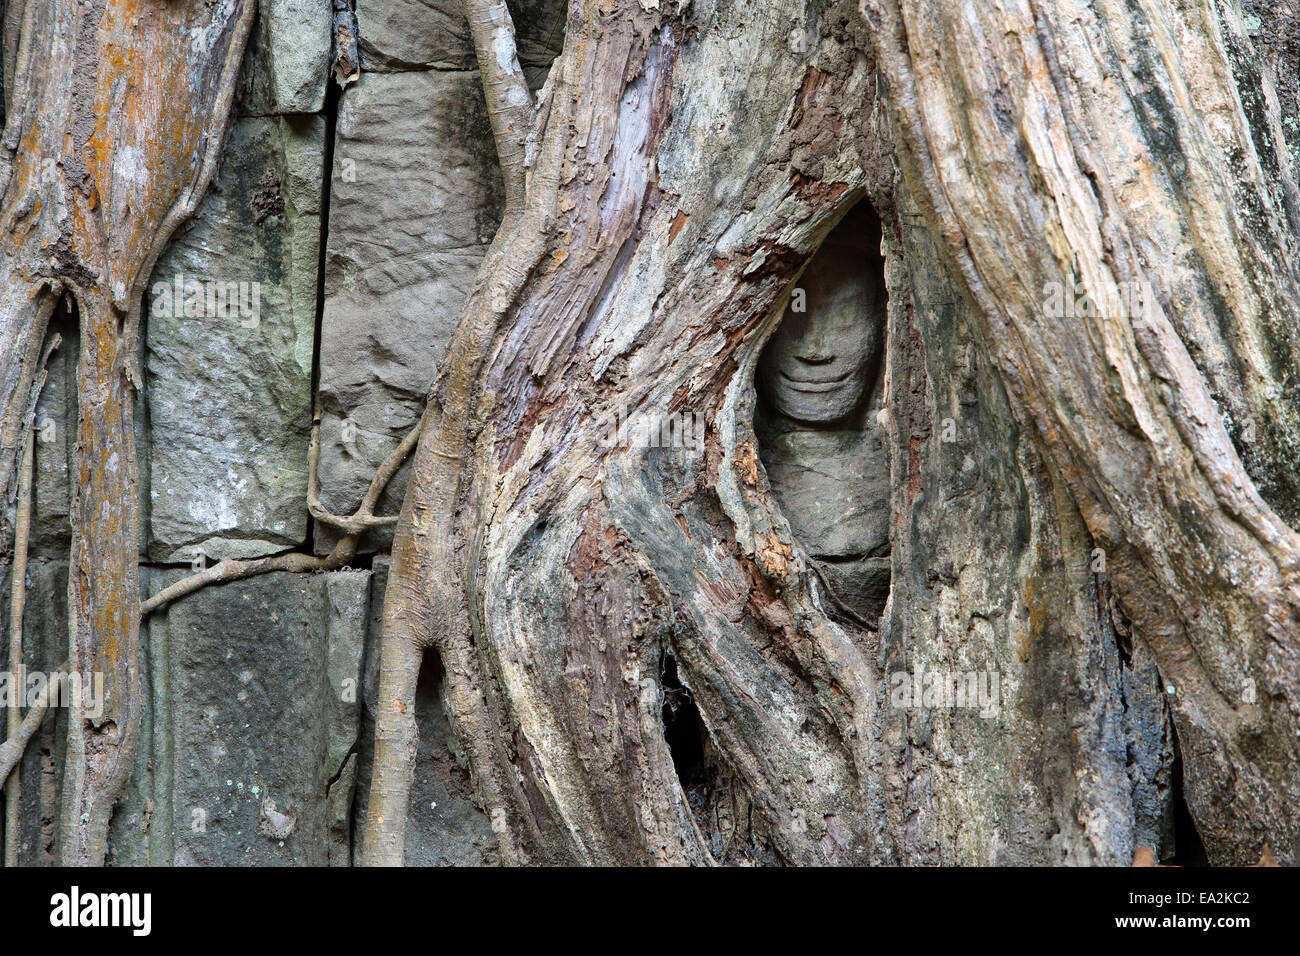 Stone Buddha face surrounded by strangler fig tree roots at Ta Prohm temple, Cambodia Stock Photo